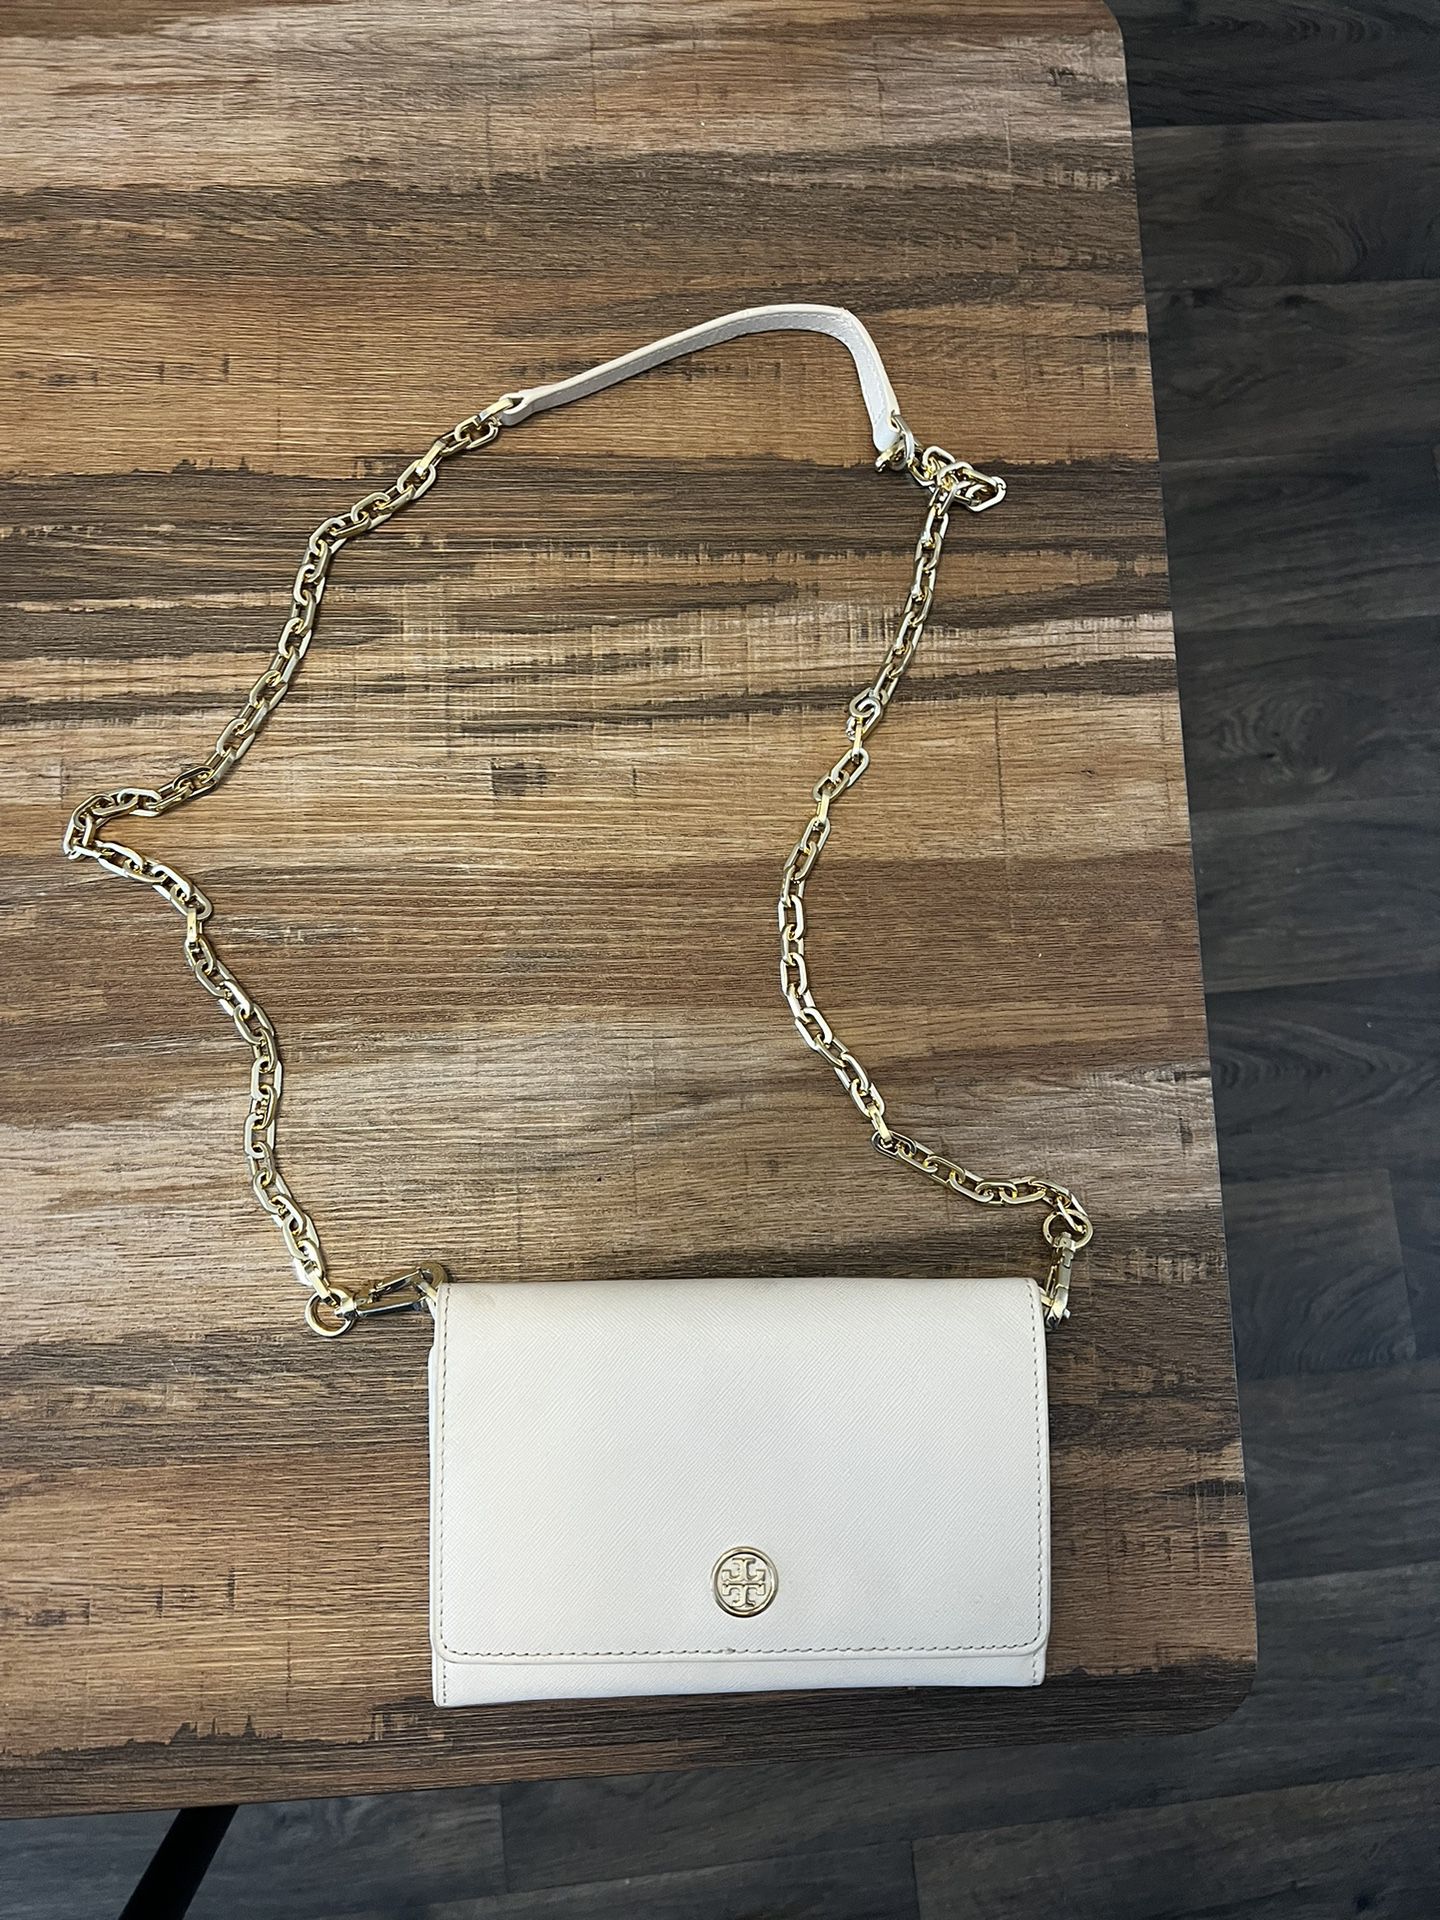 Authentic Tory Burch Crossbody Bag Purse for Sale in Charlotte, NC - OfferUp